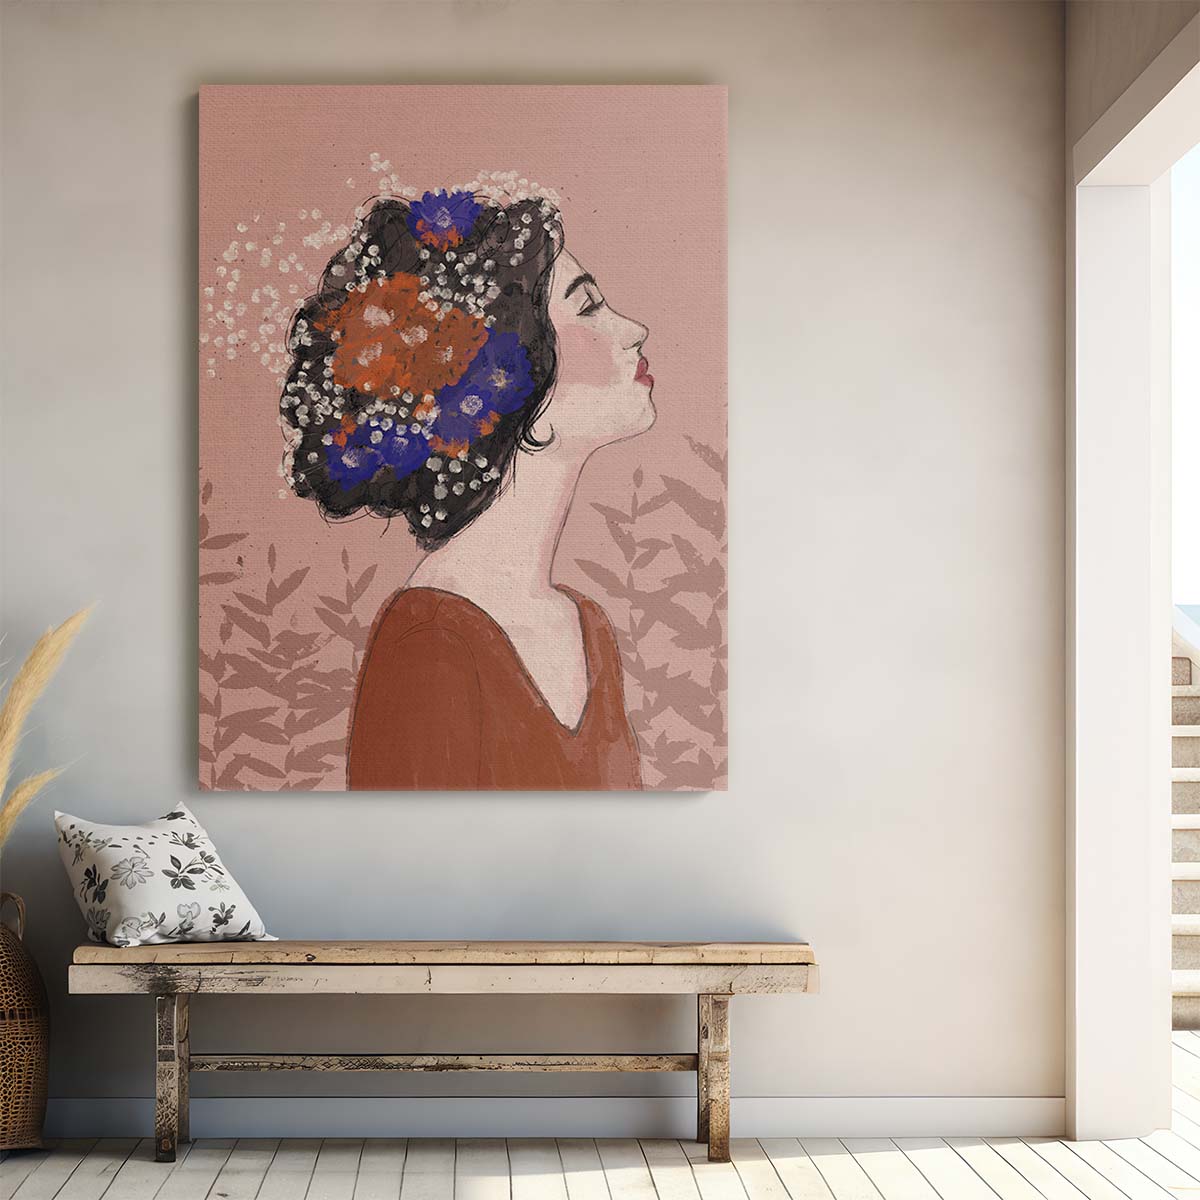 Treechild's Summer Desire Frida Kahlo Inspired Floral Woman Illustration by Luxuriance Designs, made in USA